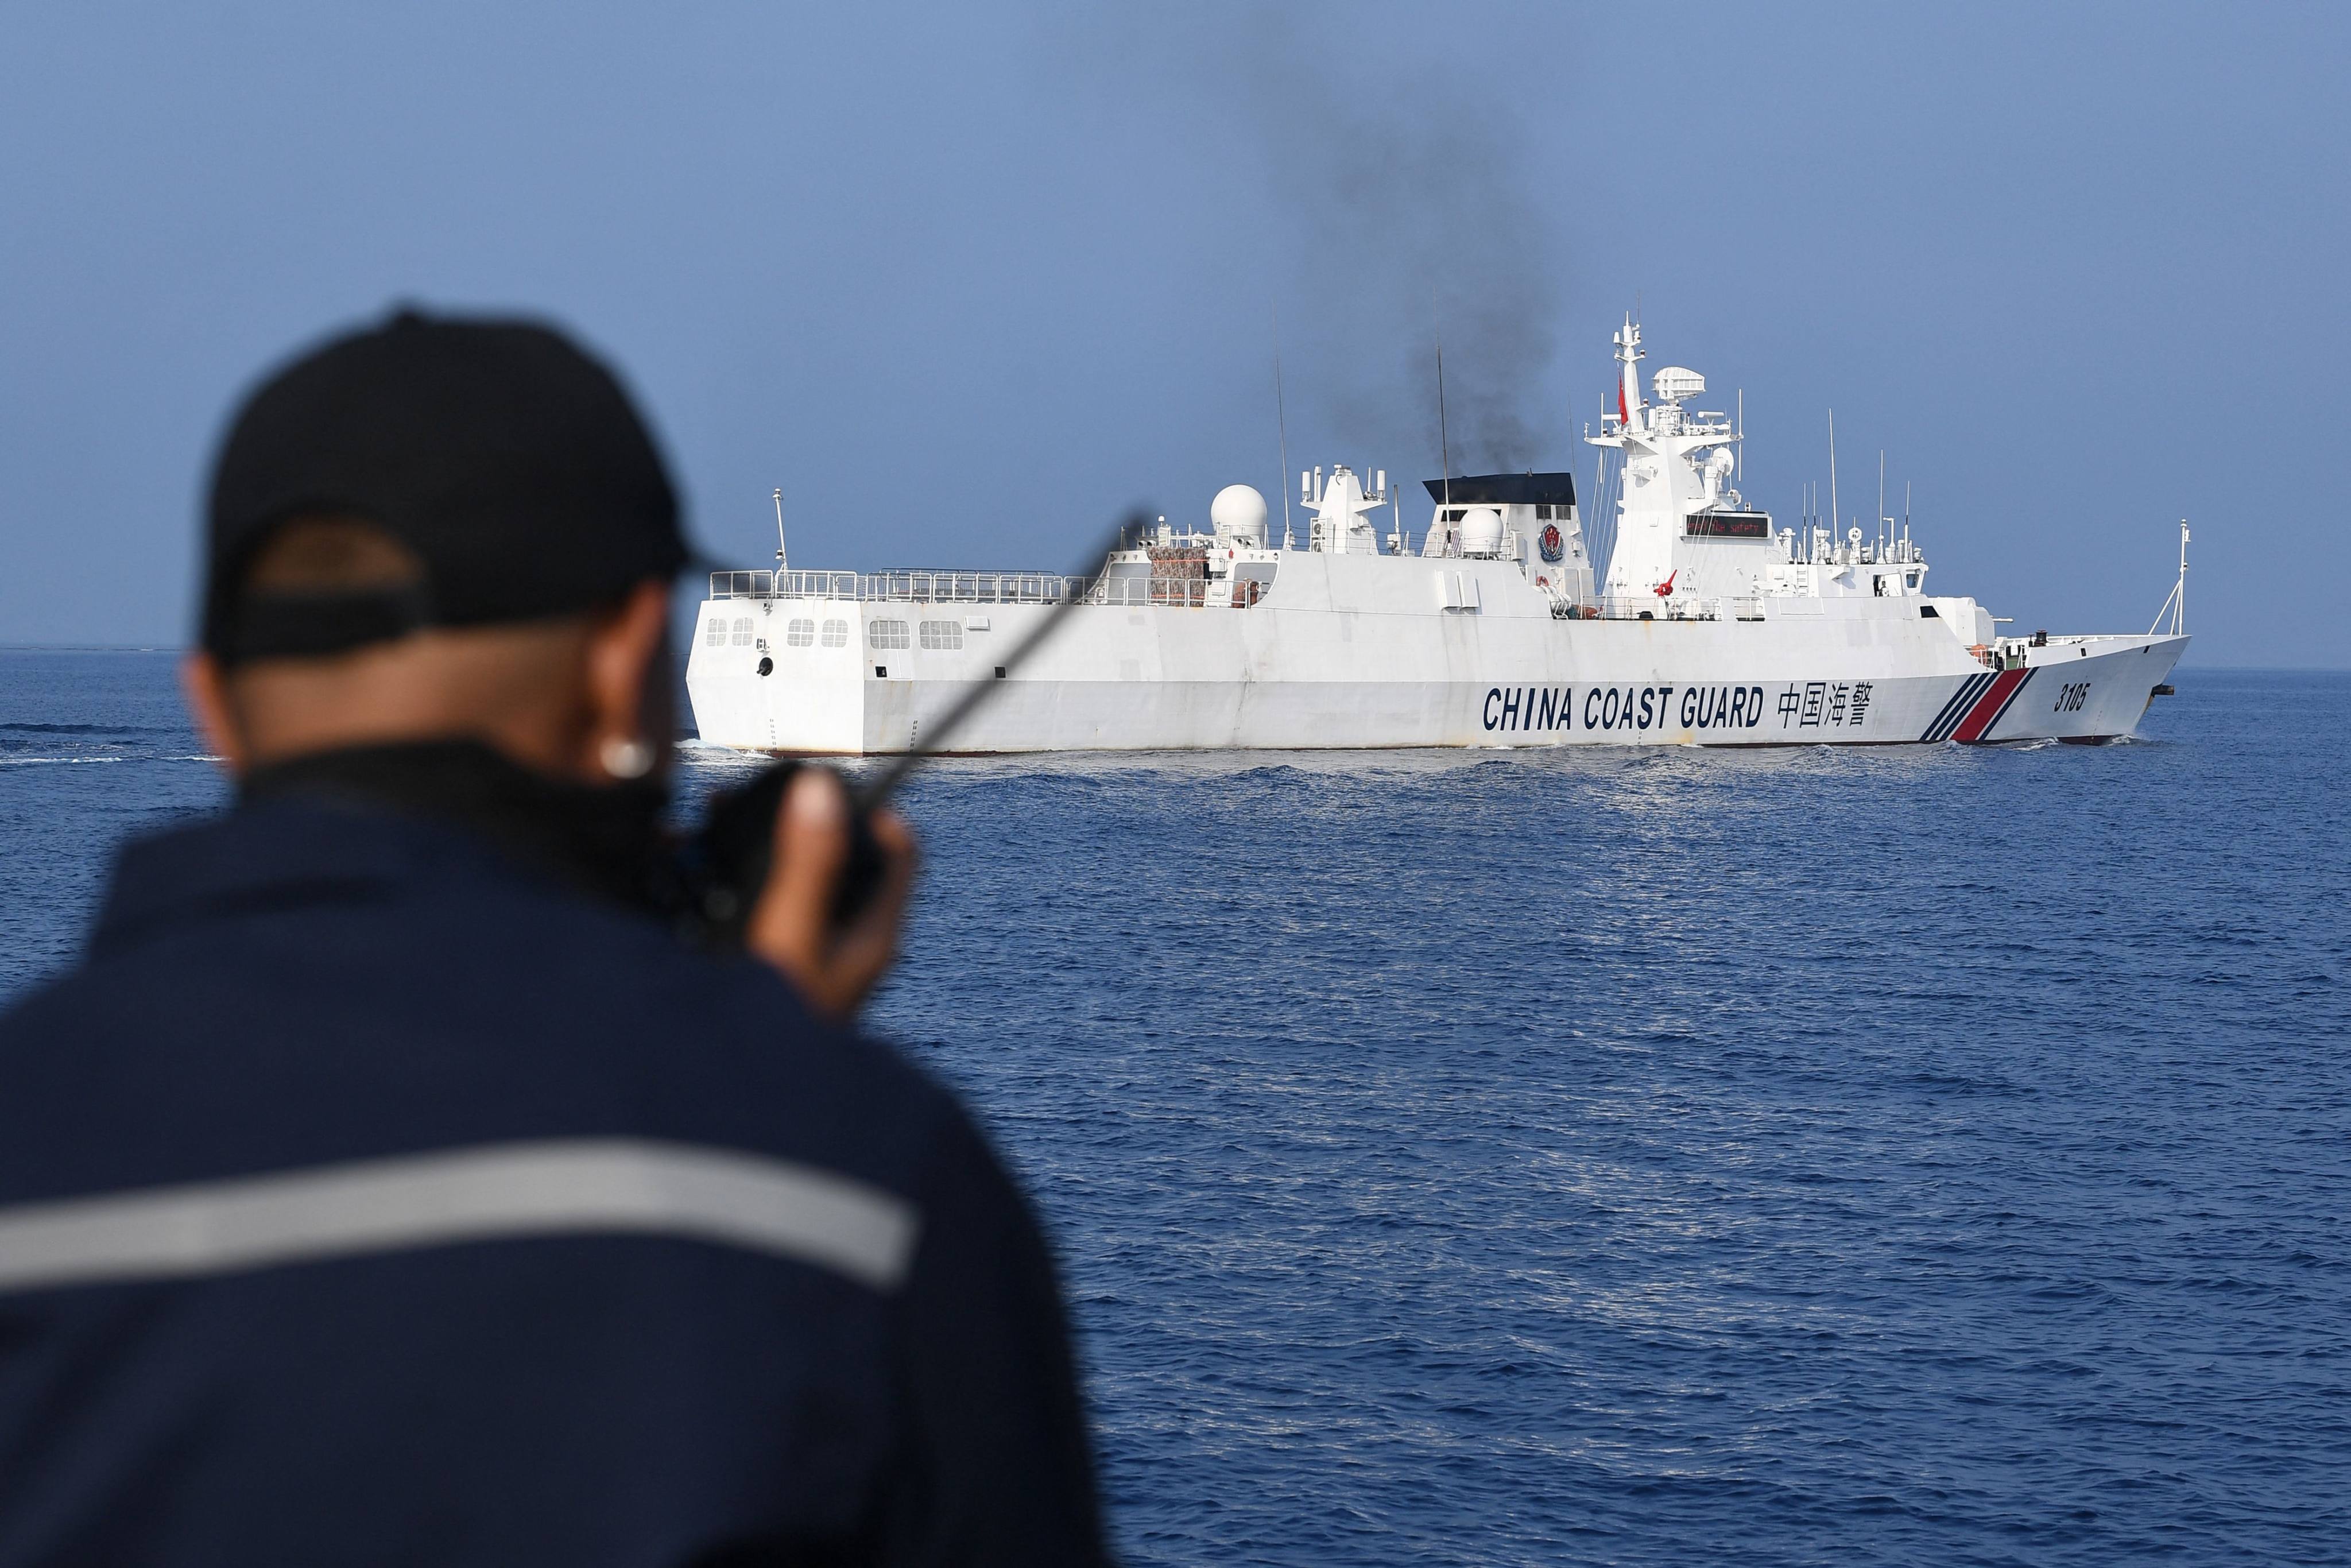 In this issue of the Global Impact newsletter, we take a look at the latest tensions and disputes in the South China Sea. Photo: AFP